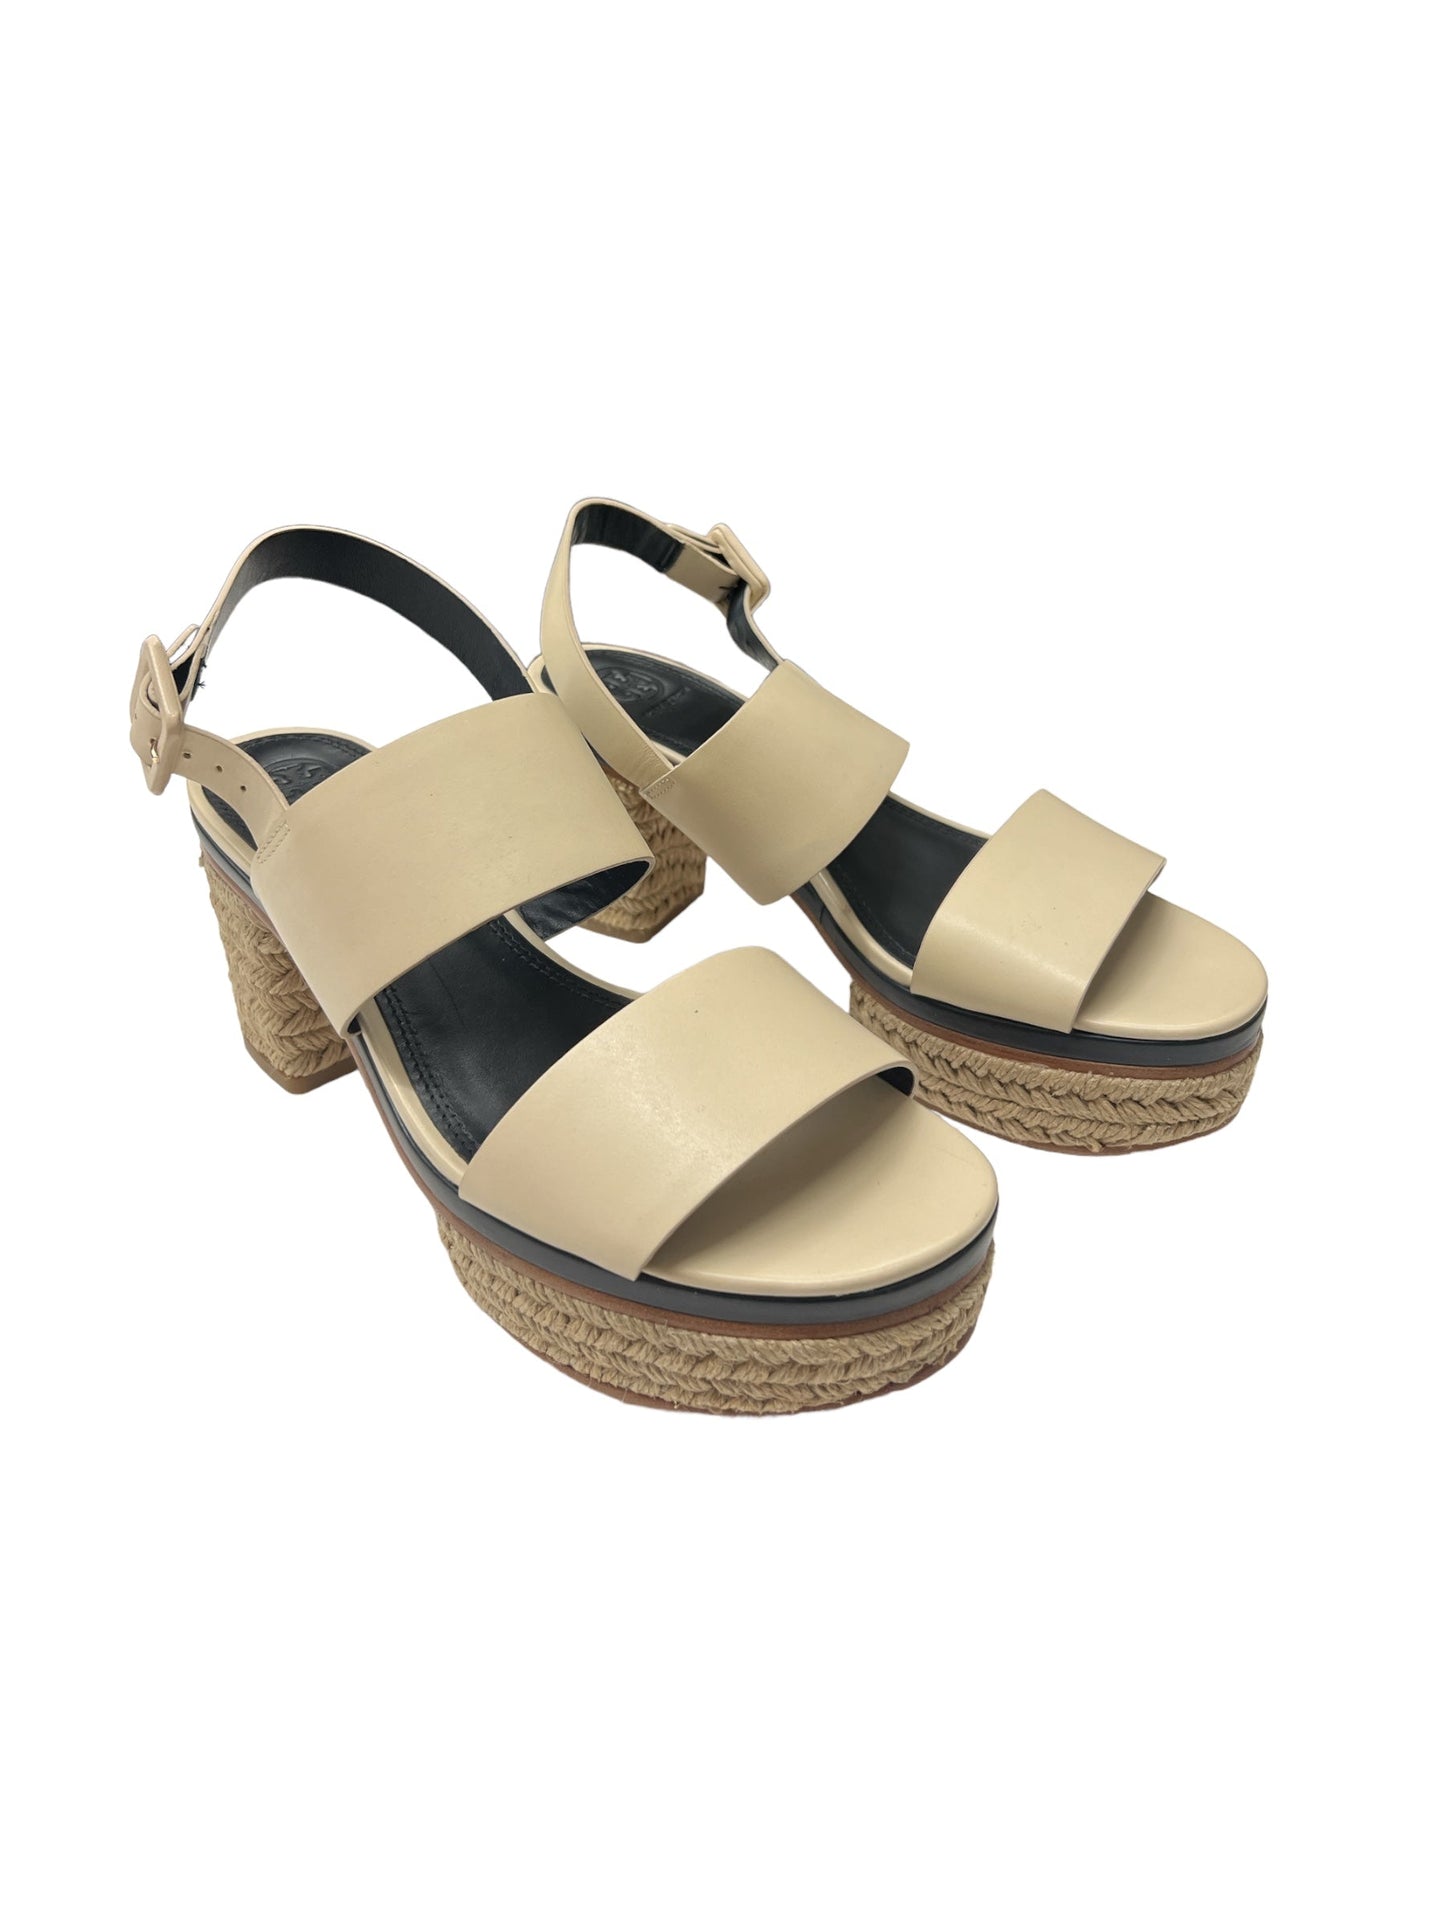 Sandals Heels Block By Tory Burch  Size: 8.5